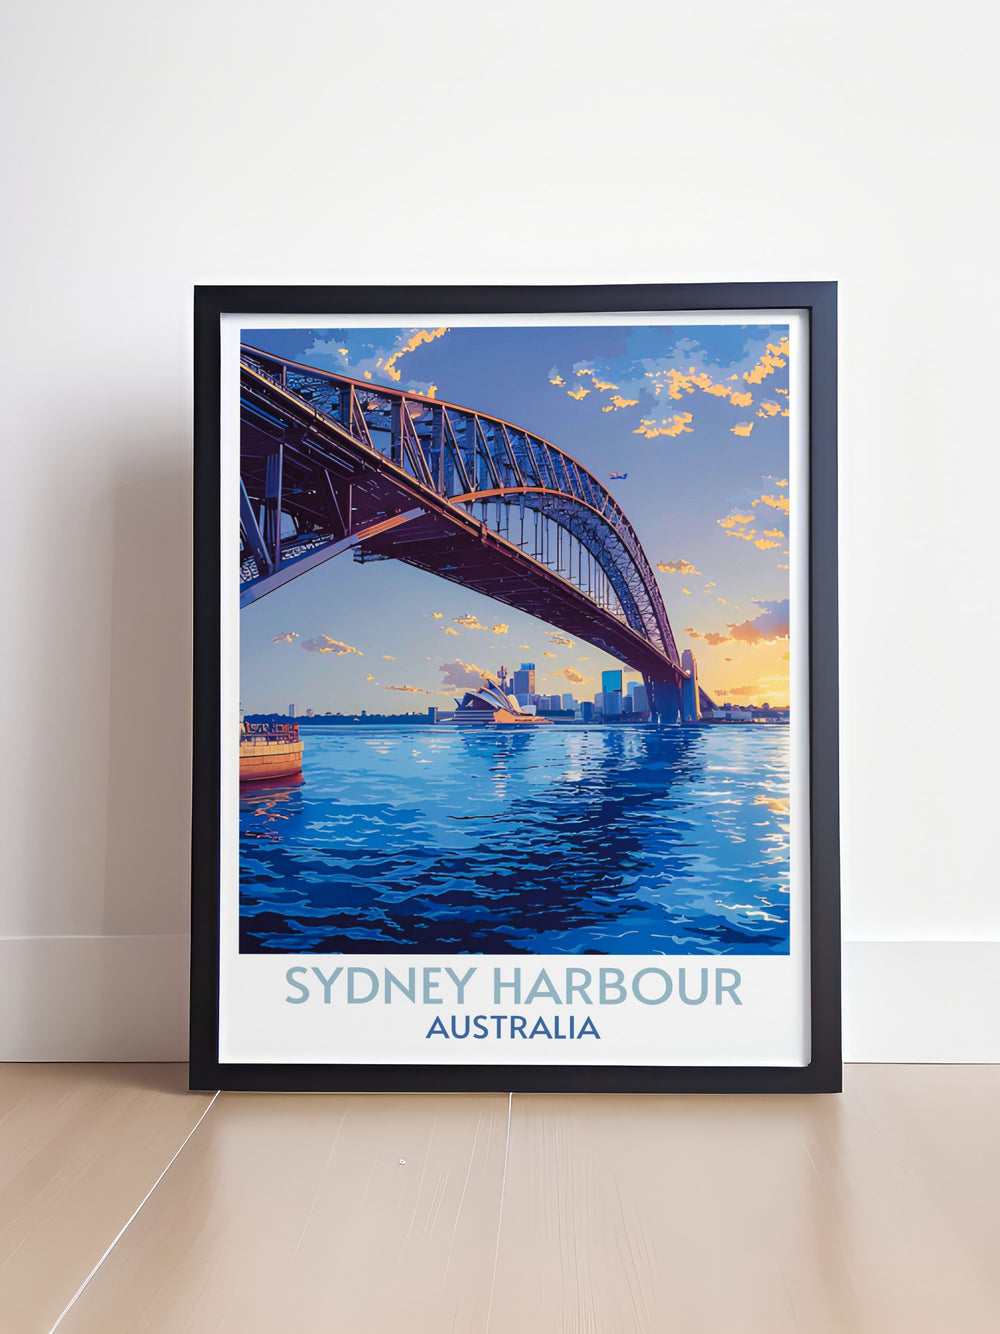 Artistic rendition of Sydney Opera House at sunset, blending traditional Australian scenes with contemporary art.